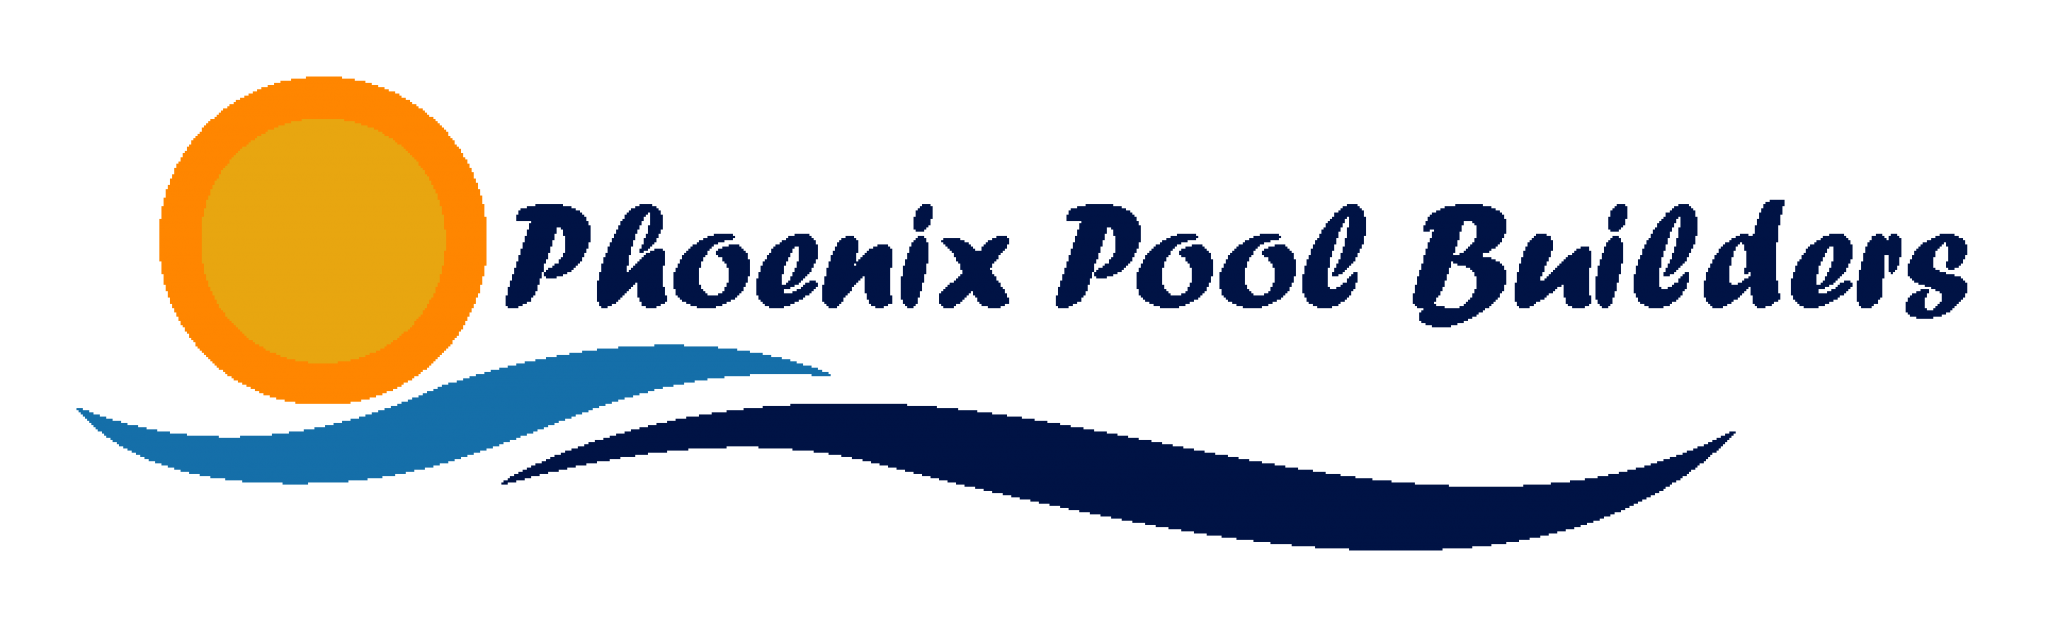 Phoenix Pool Builders Has a Reputation of Using the Best Quality Pool Installation Materials